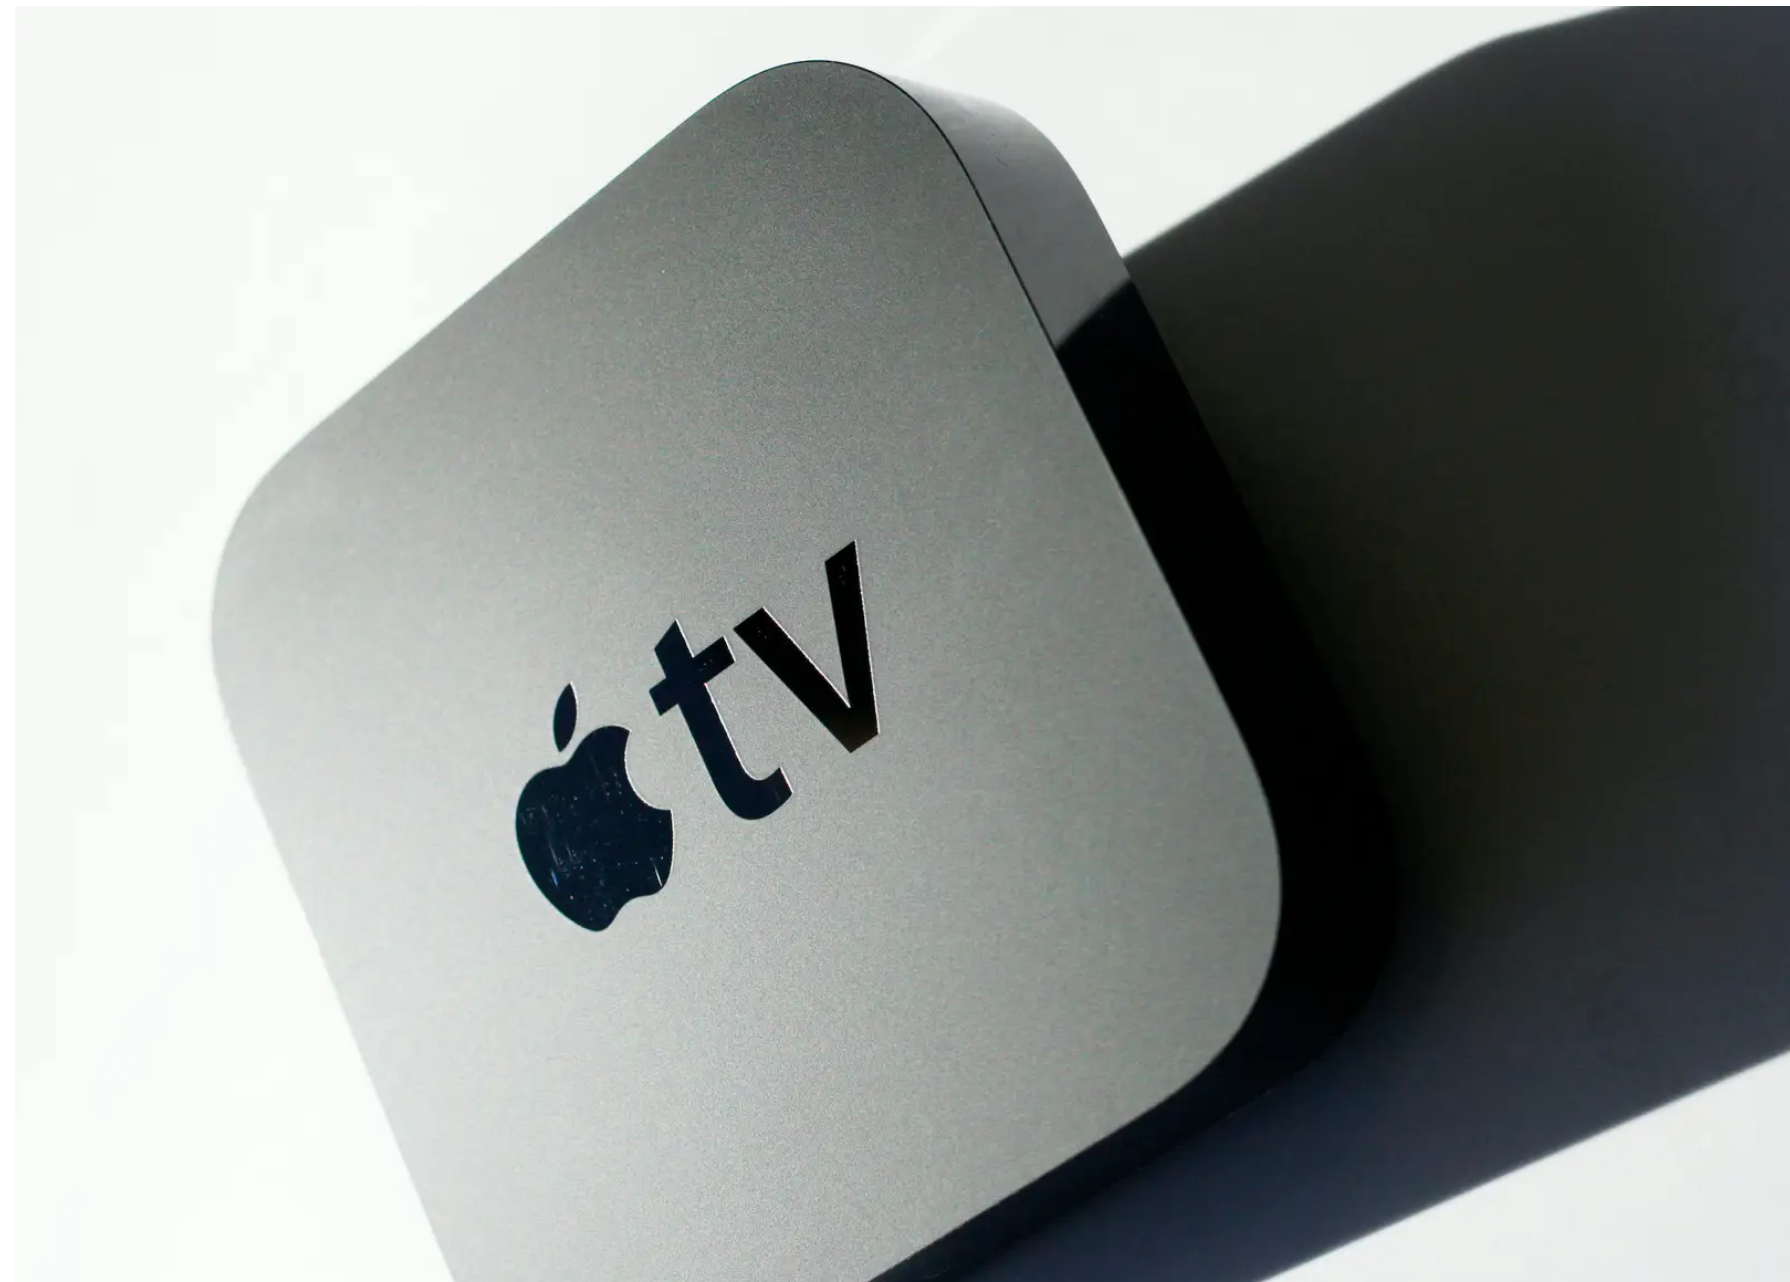 How To Factory Reset Apple TV For Resale or Repair